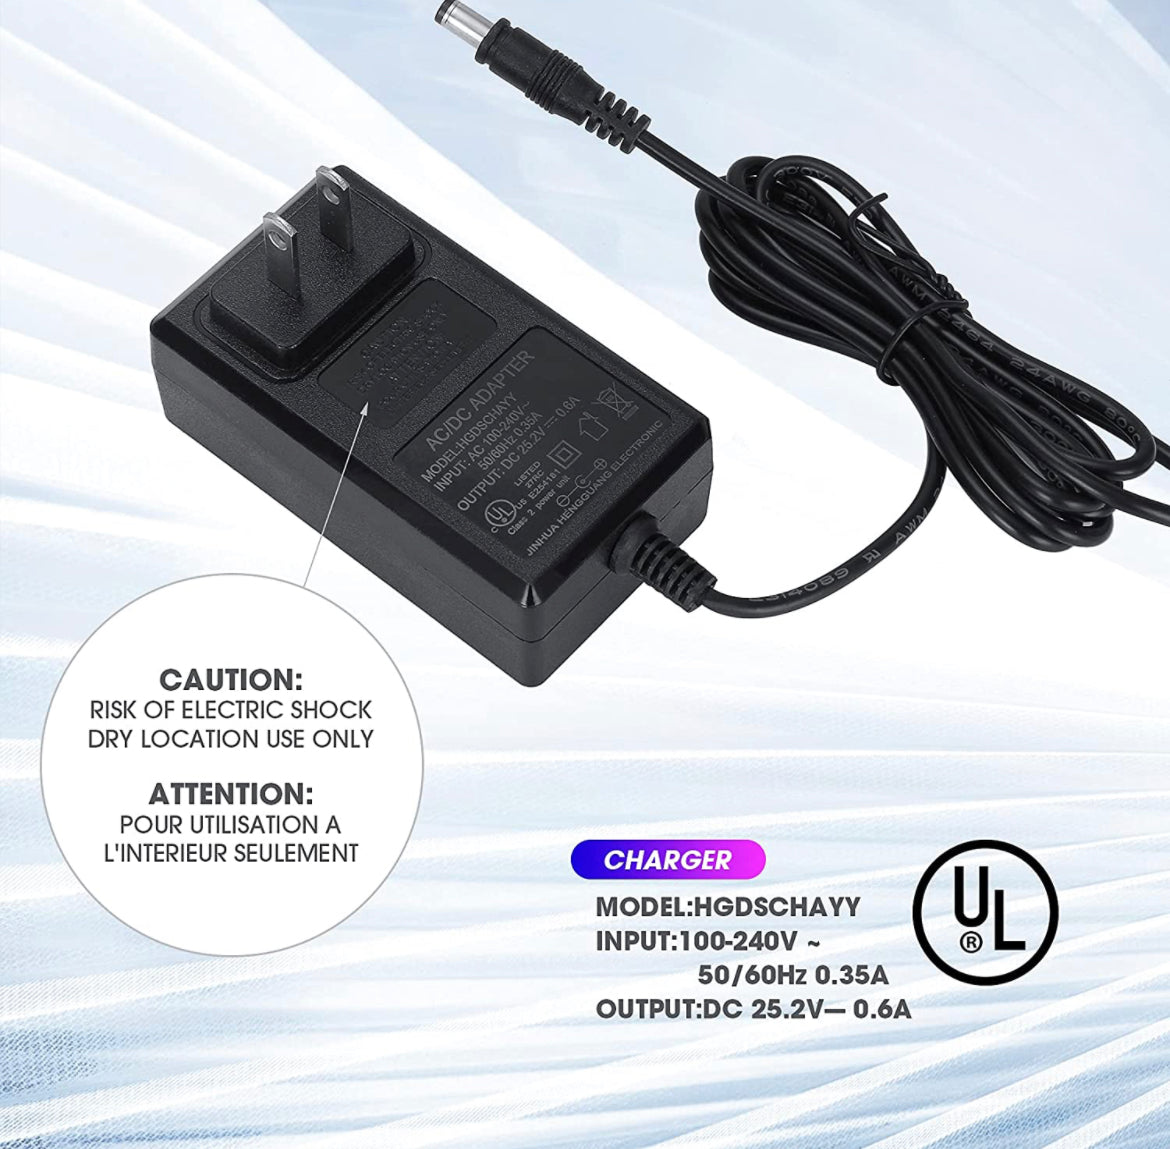 Battery Charger Adapter AC Replacement for VI PRO